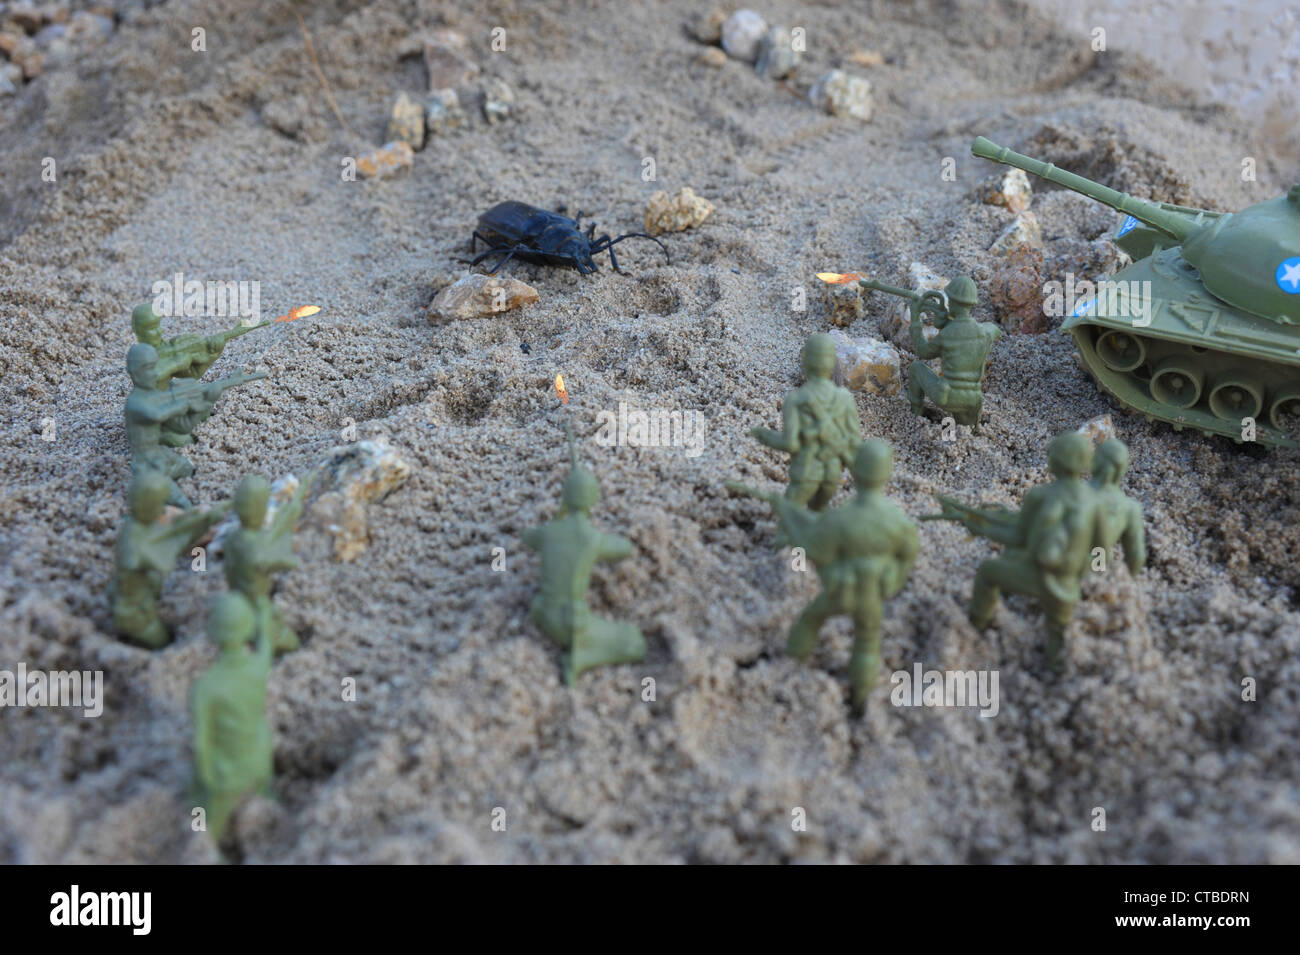 A group of green army men toys fighting a big bug Stock Photo